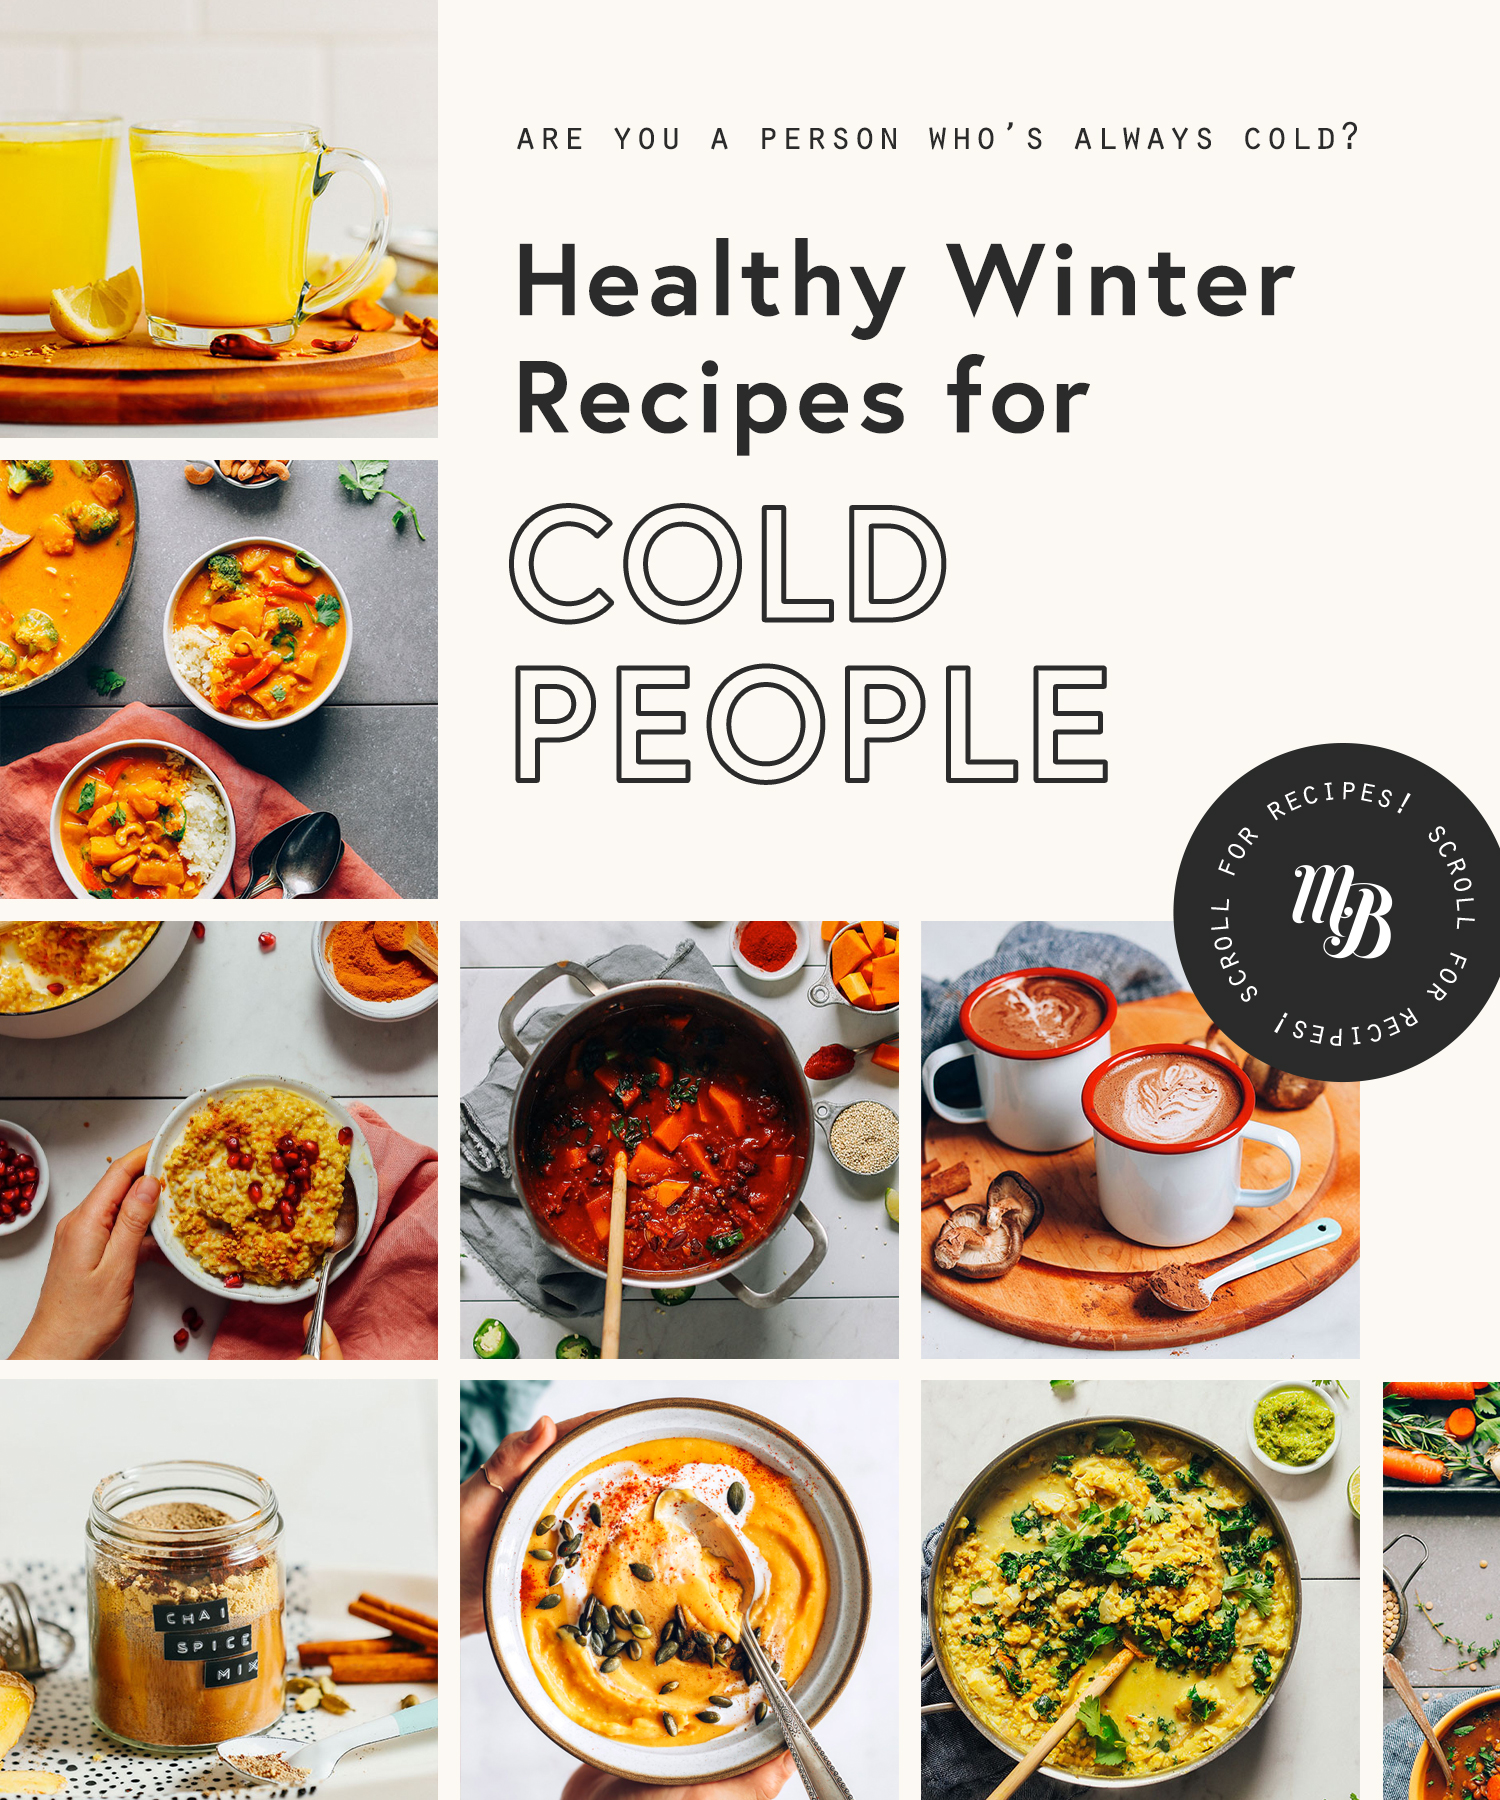 Assortment of healthy winter recipes for people who are always cold